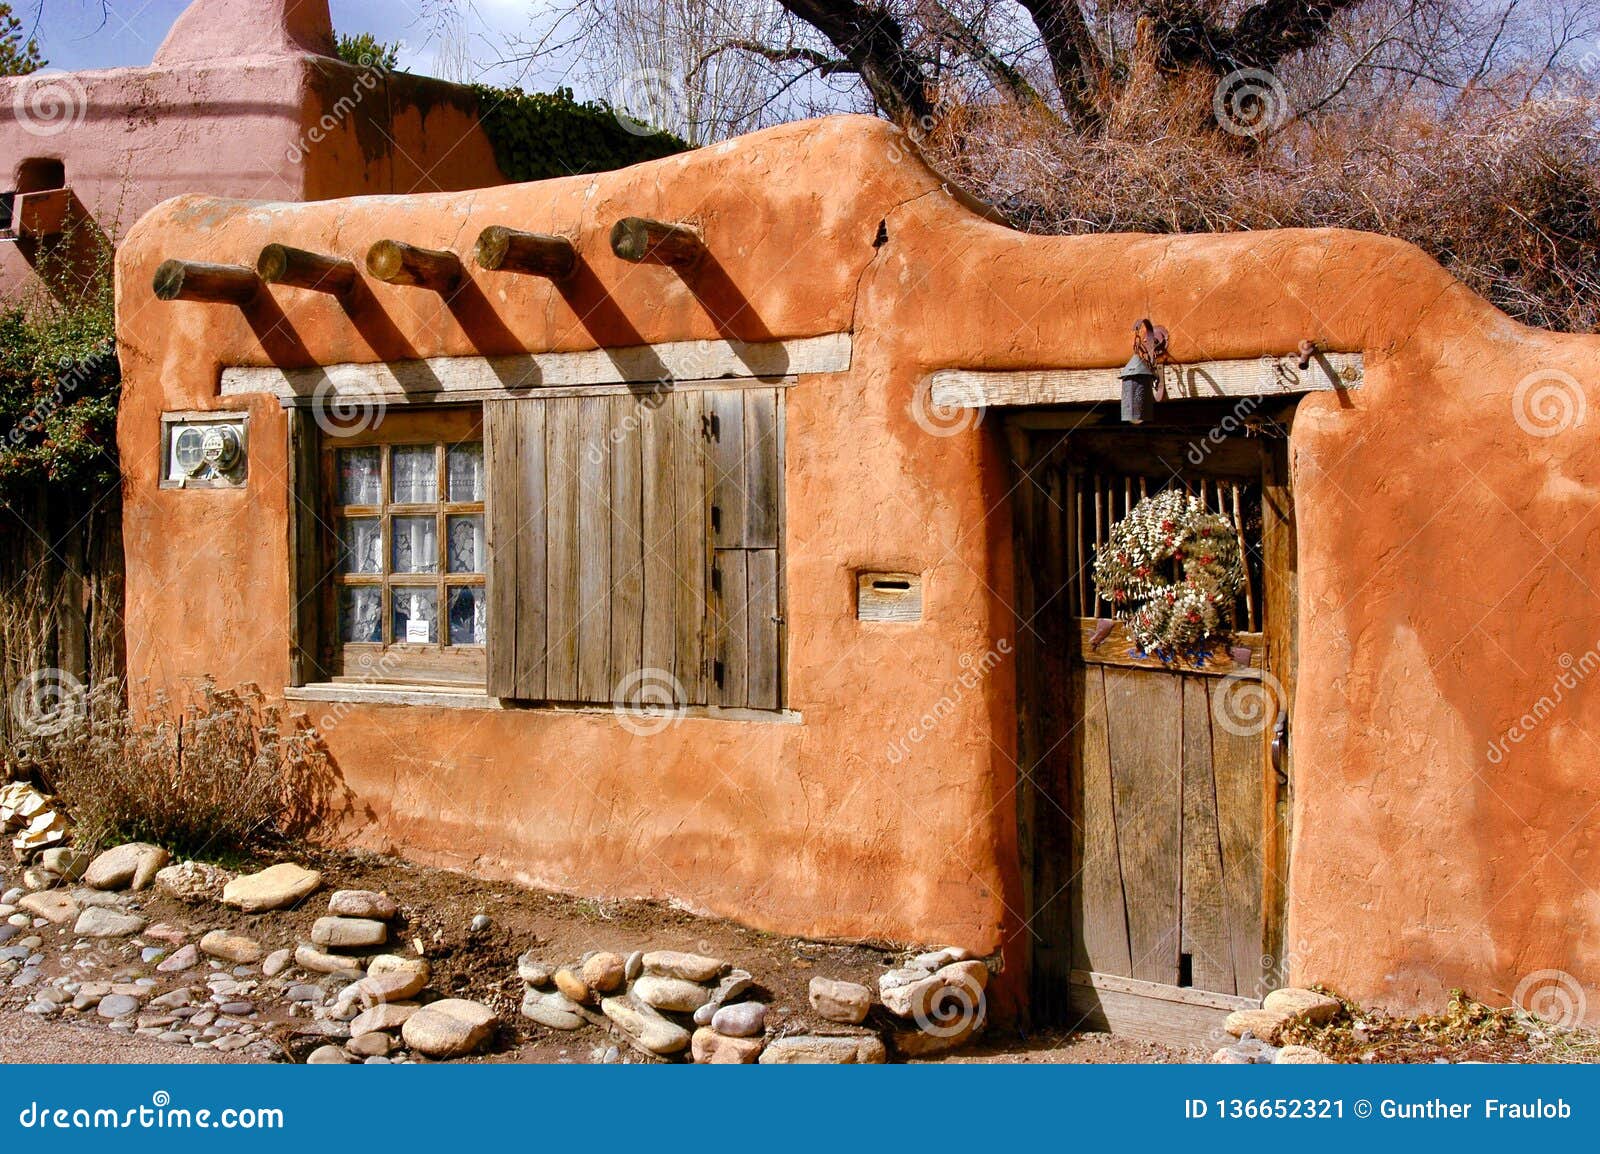 historical santa fe adobe house with old styled wood beams and adobe stucco.